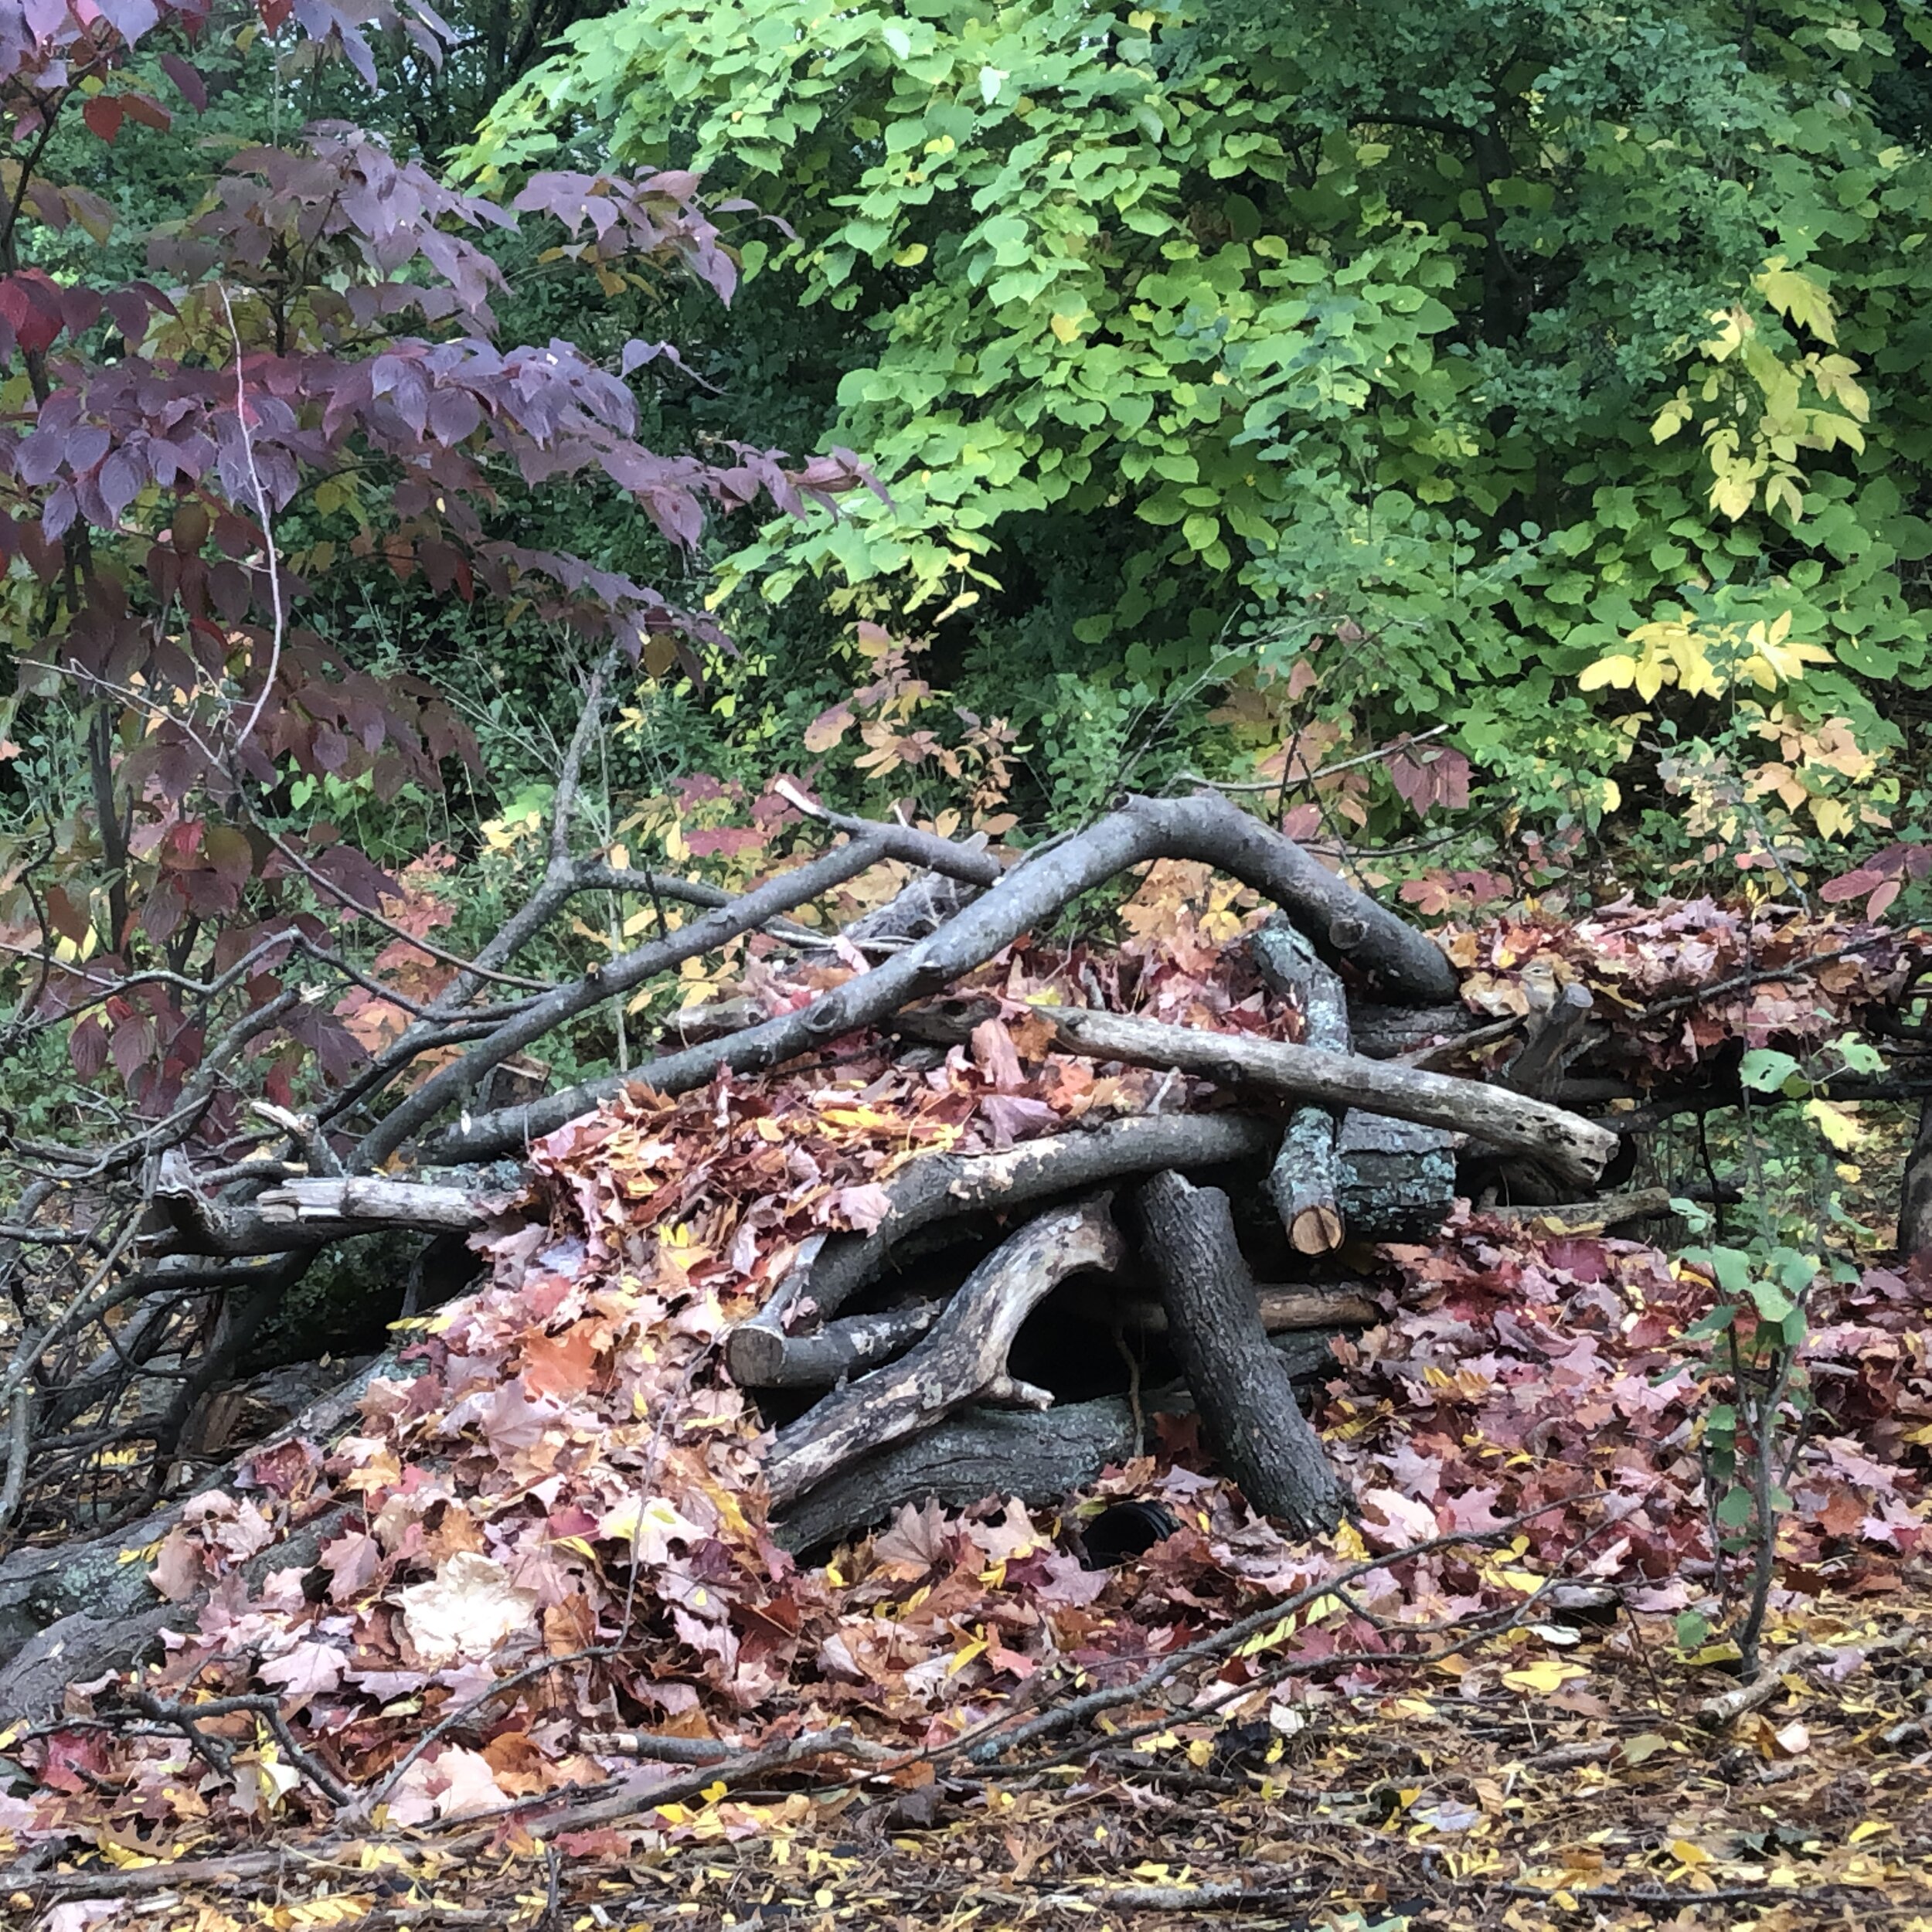 The backyard wood pile is being covered in leaves moved from the front of our home. The leaves provide a blanket over the woodpile and provide an even better habitat for insects, small mammals and reptiles that call it home.